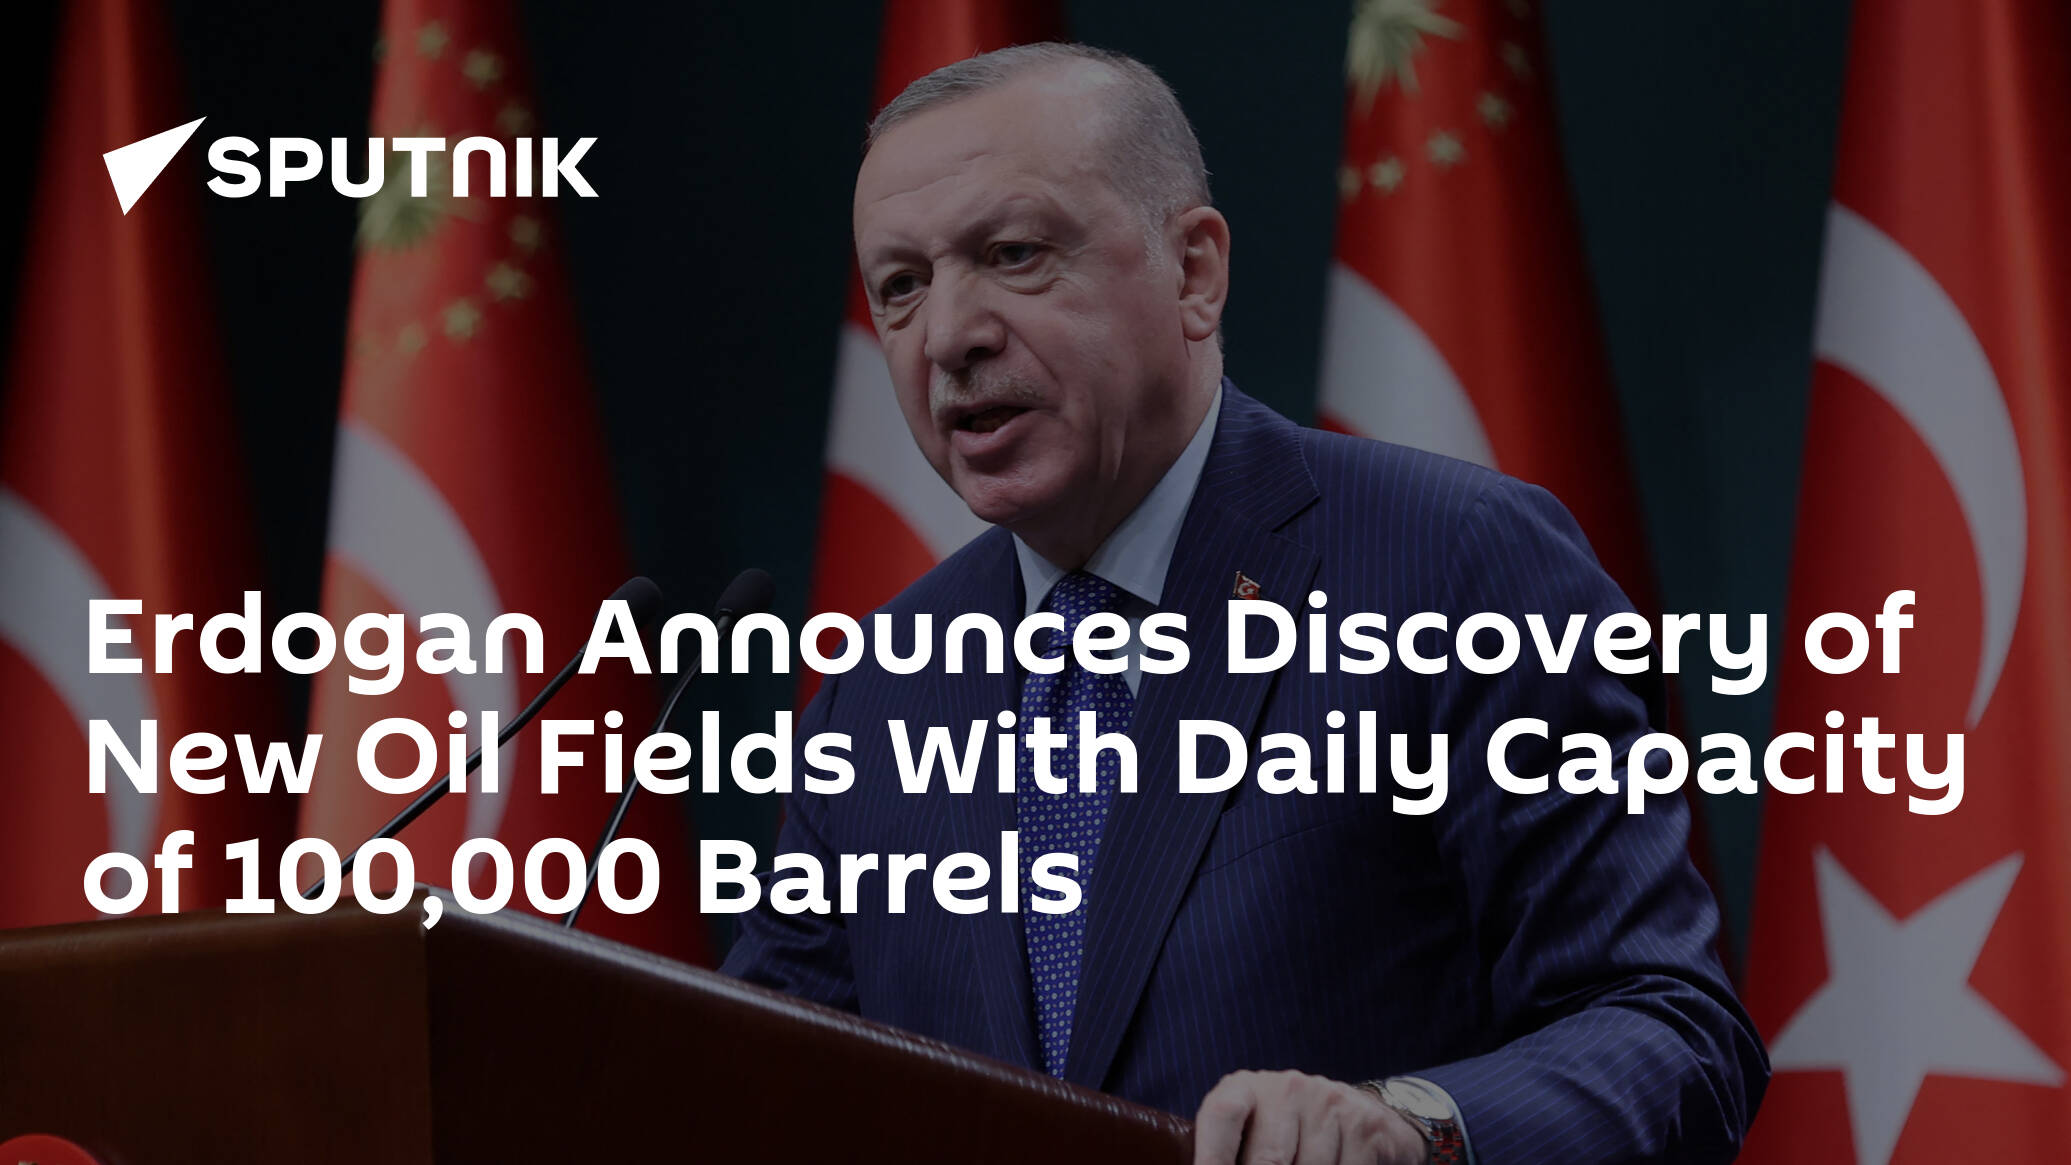 Erdogan Announces Discovery of New Oil Fields With Daily Capacity of 100,000 Barrels